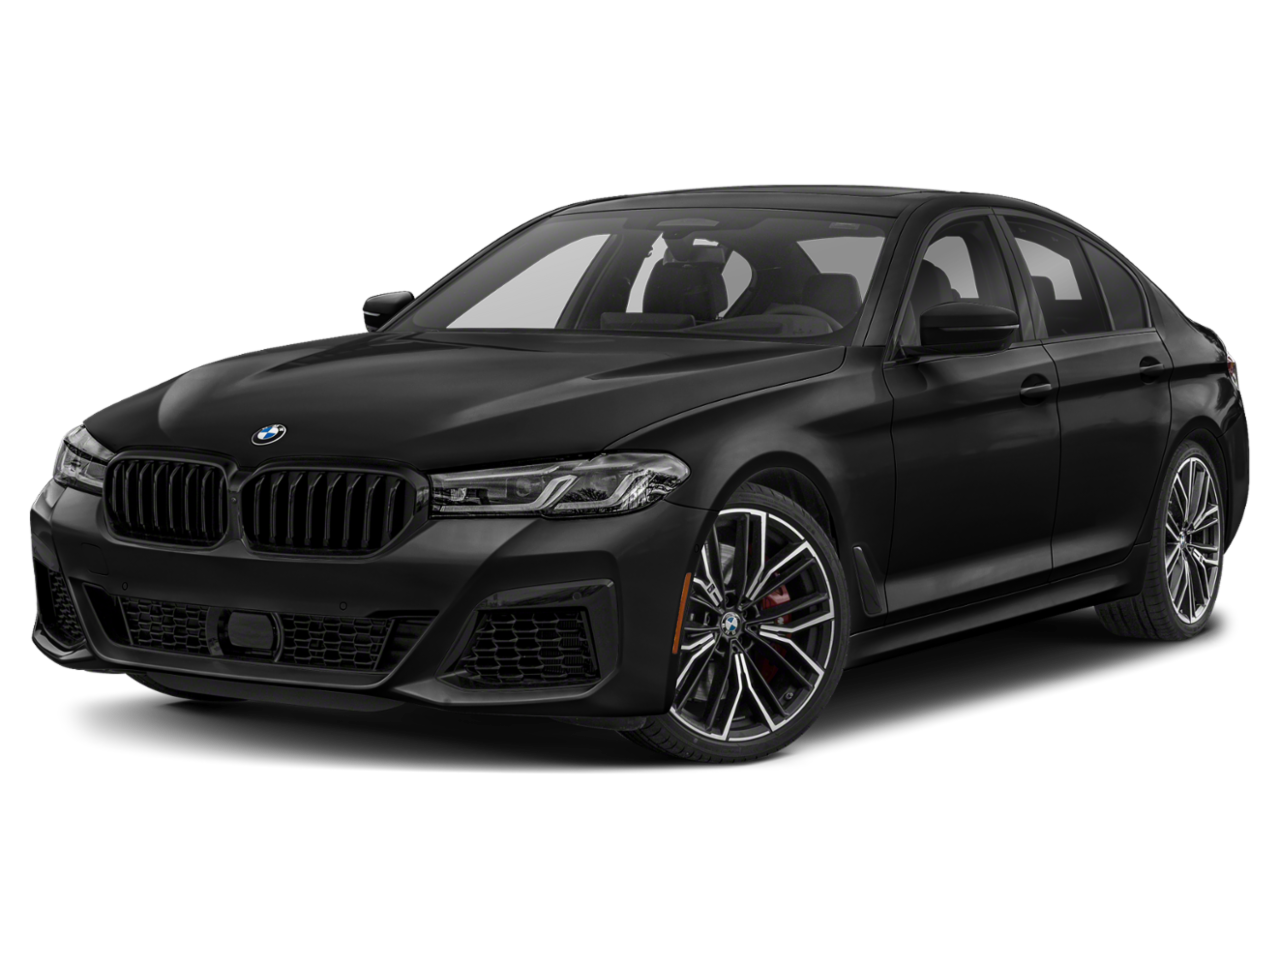 New BMW M550i xDrive from your DALLAS, TX dealership, Sewell Collision.